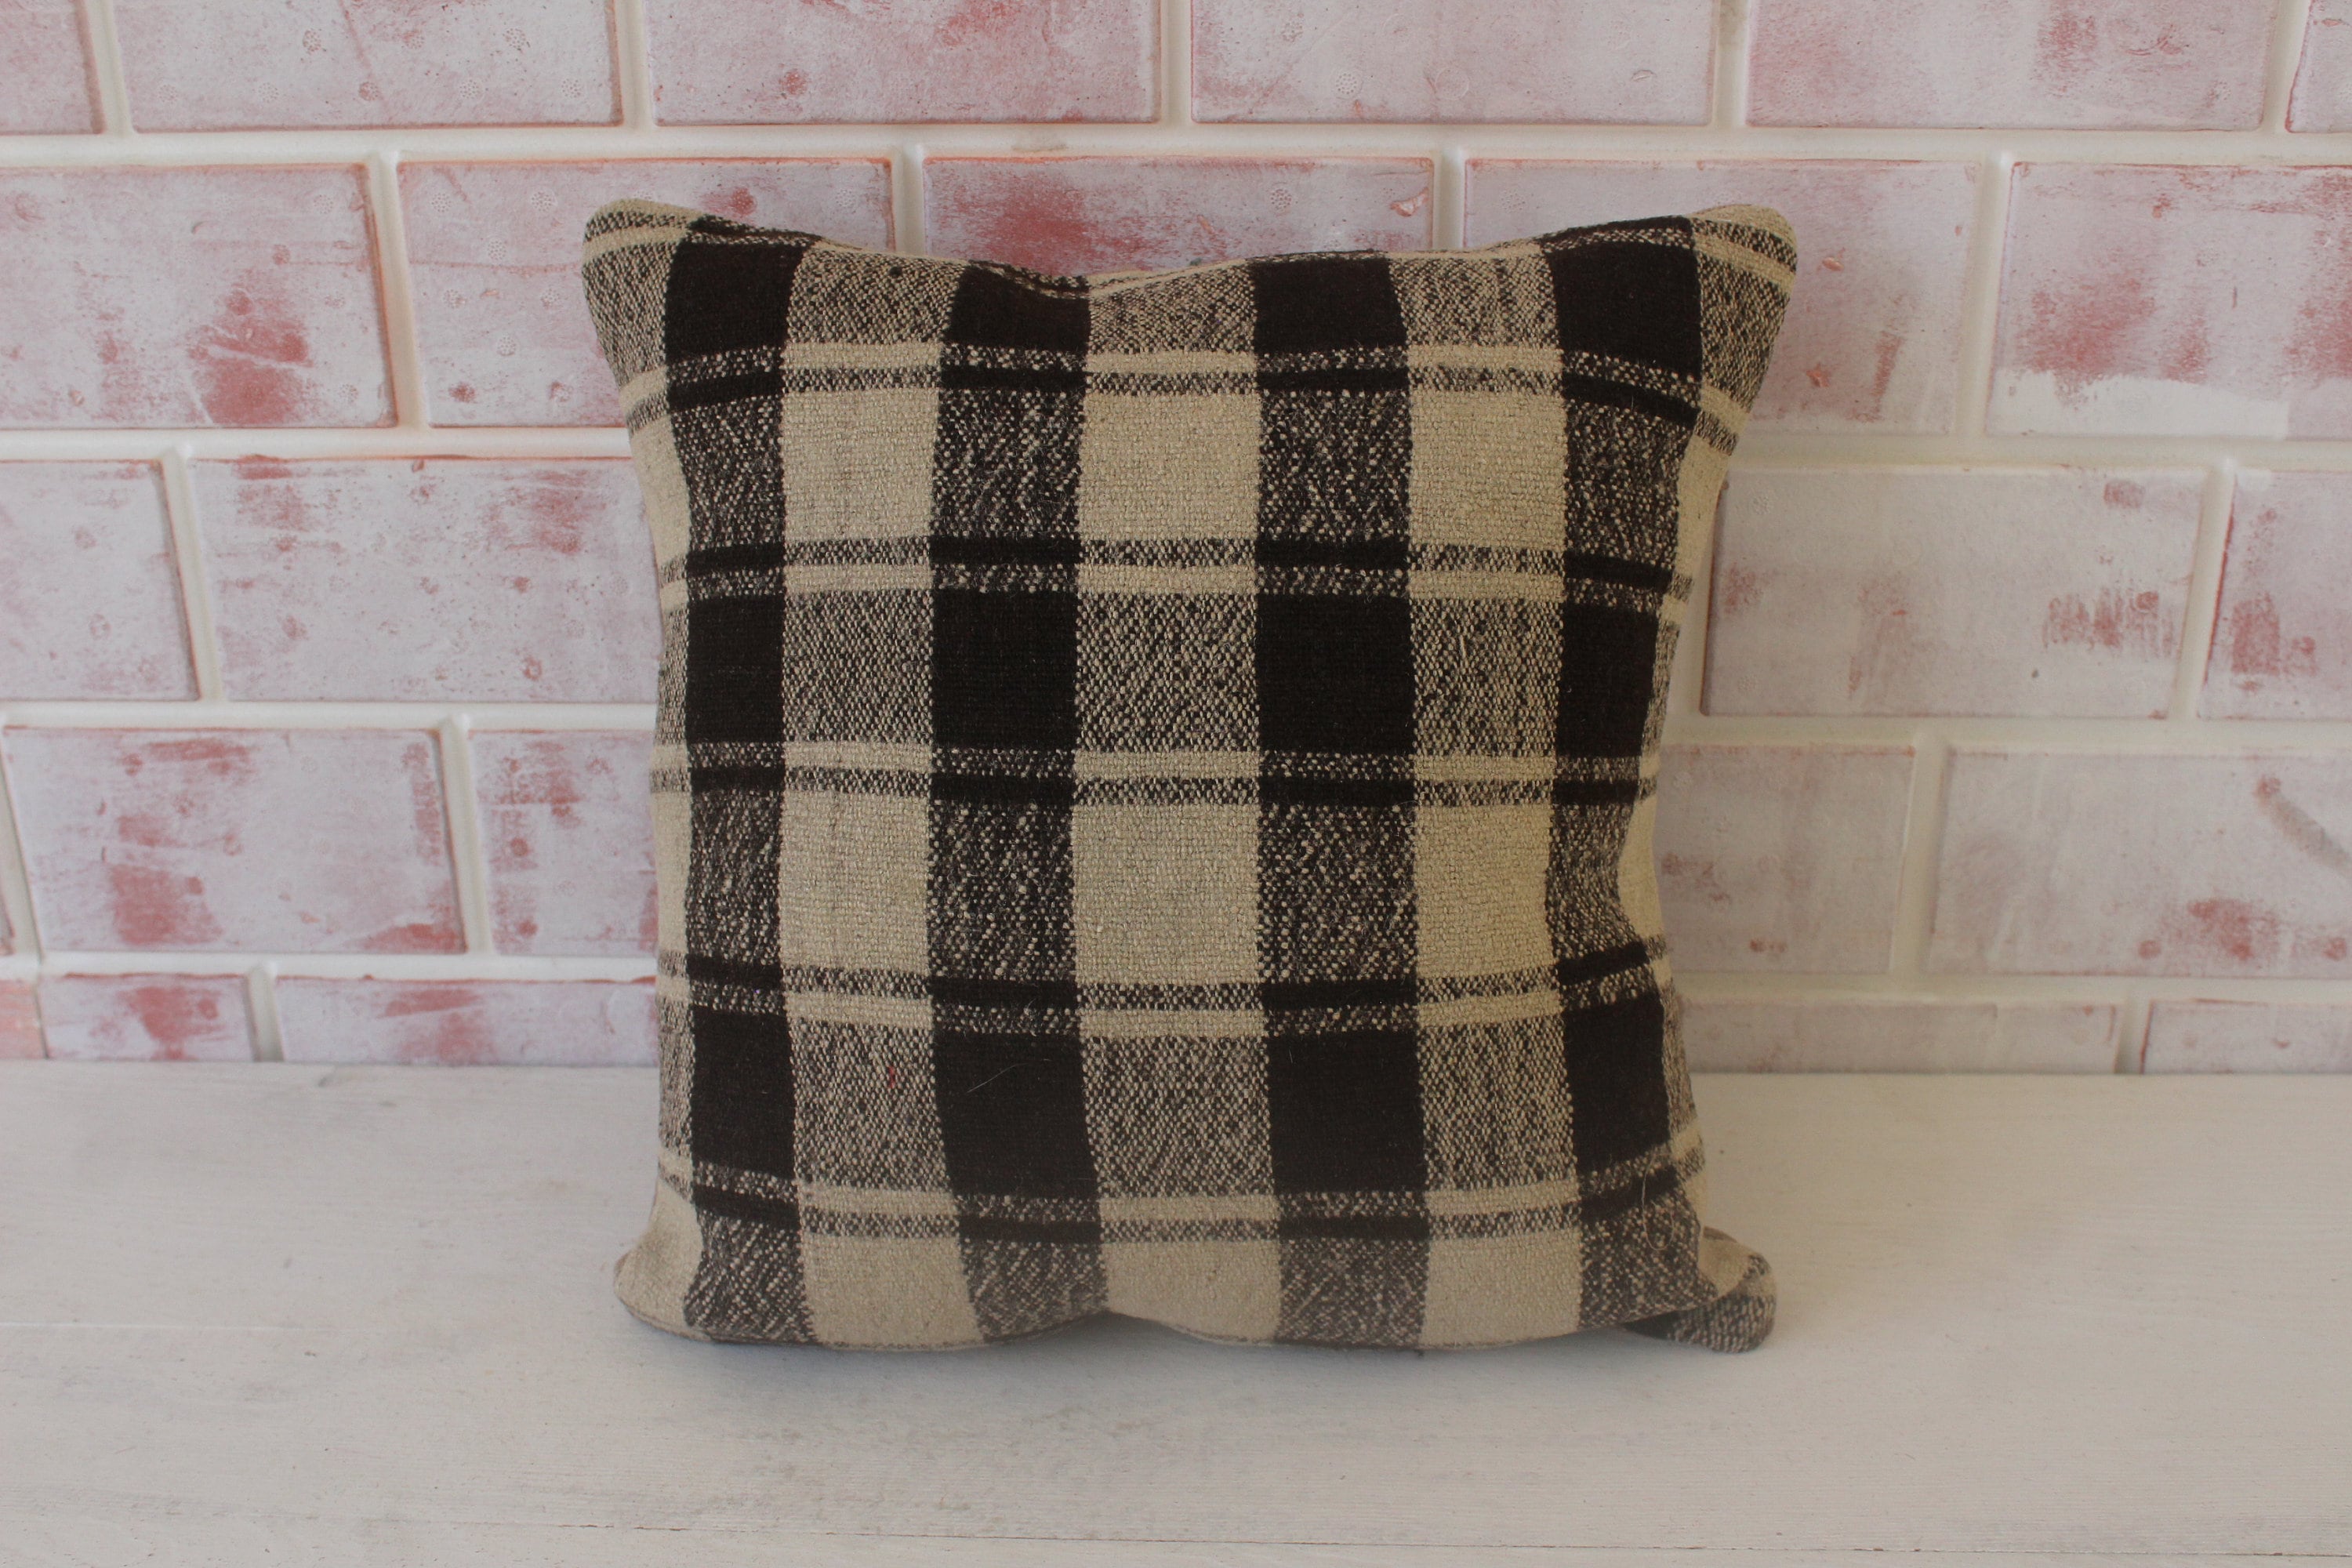 Cream, Blue and Brown Plaid Wool Lumbar Pillow 14x22 by Vantage Design